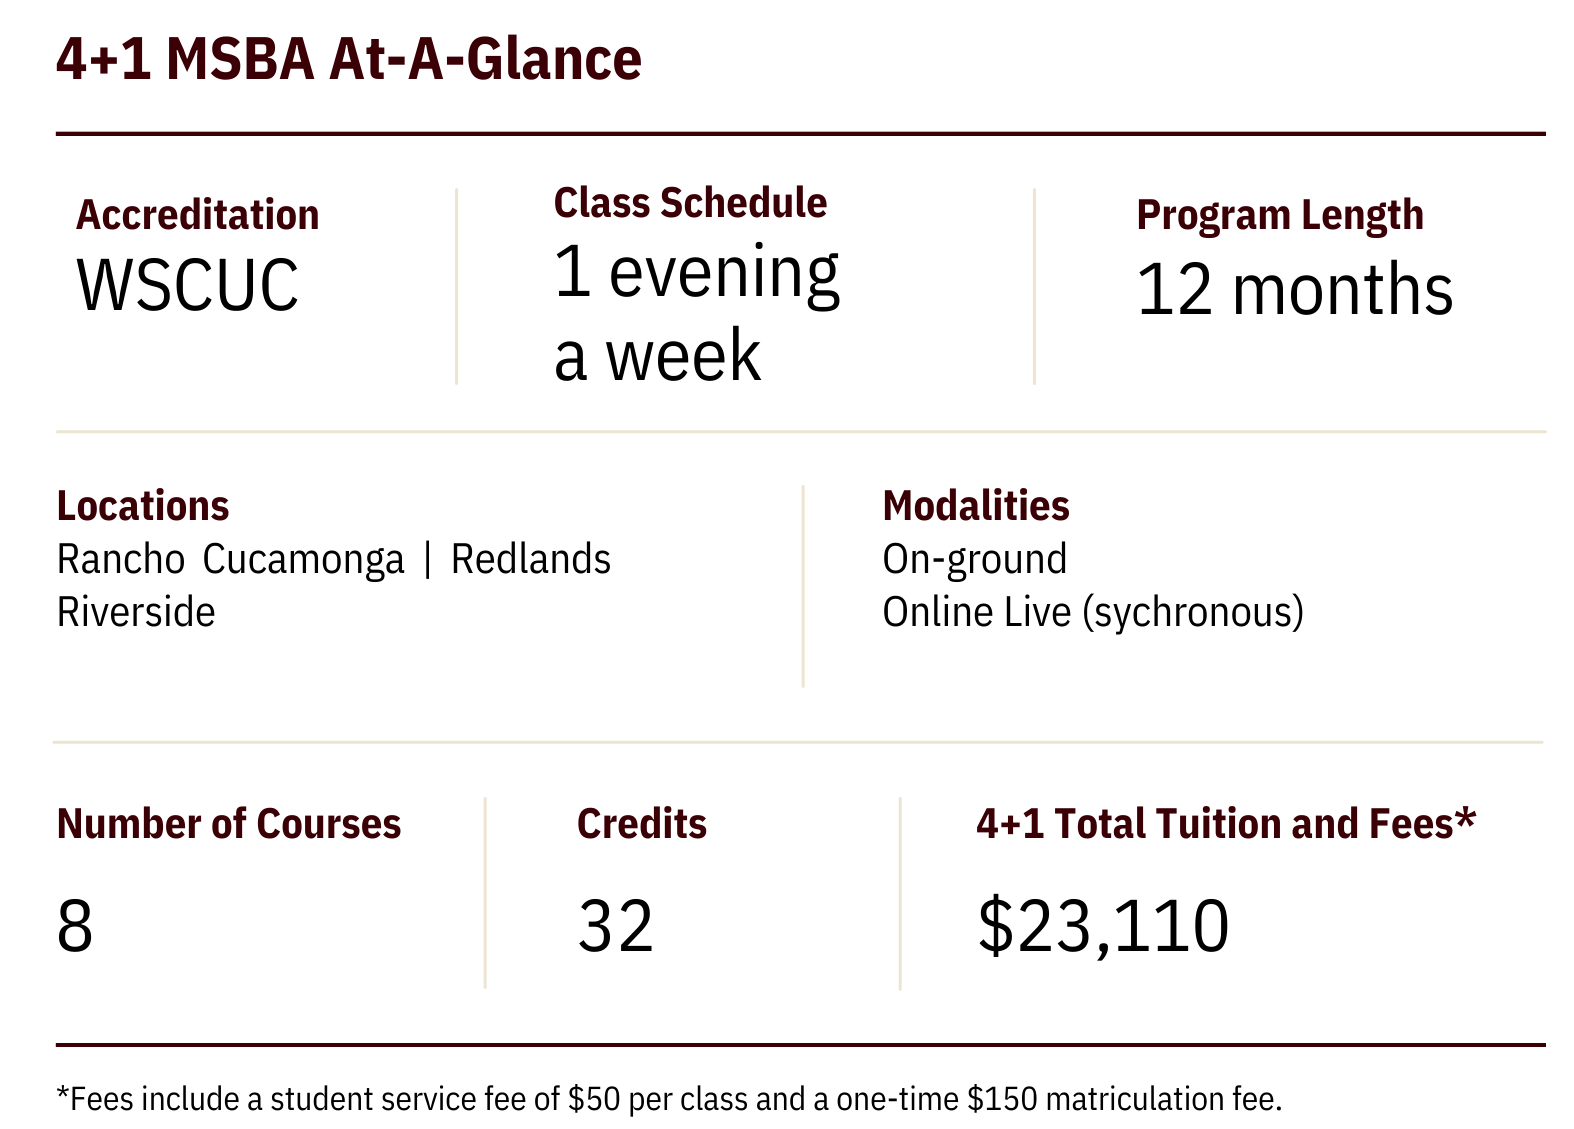 4+1 MSBA at a glance.png